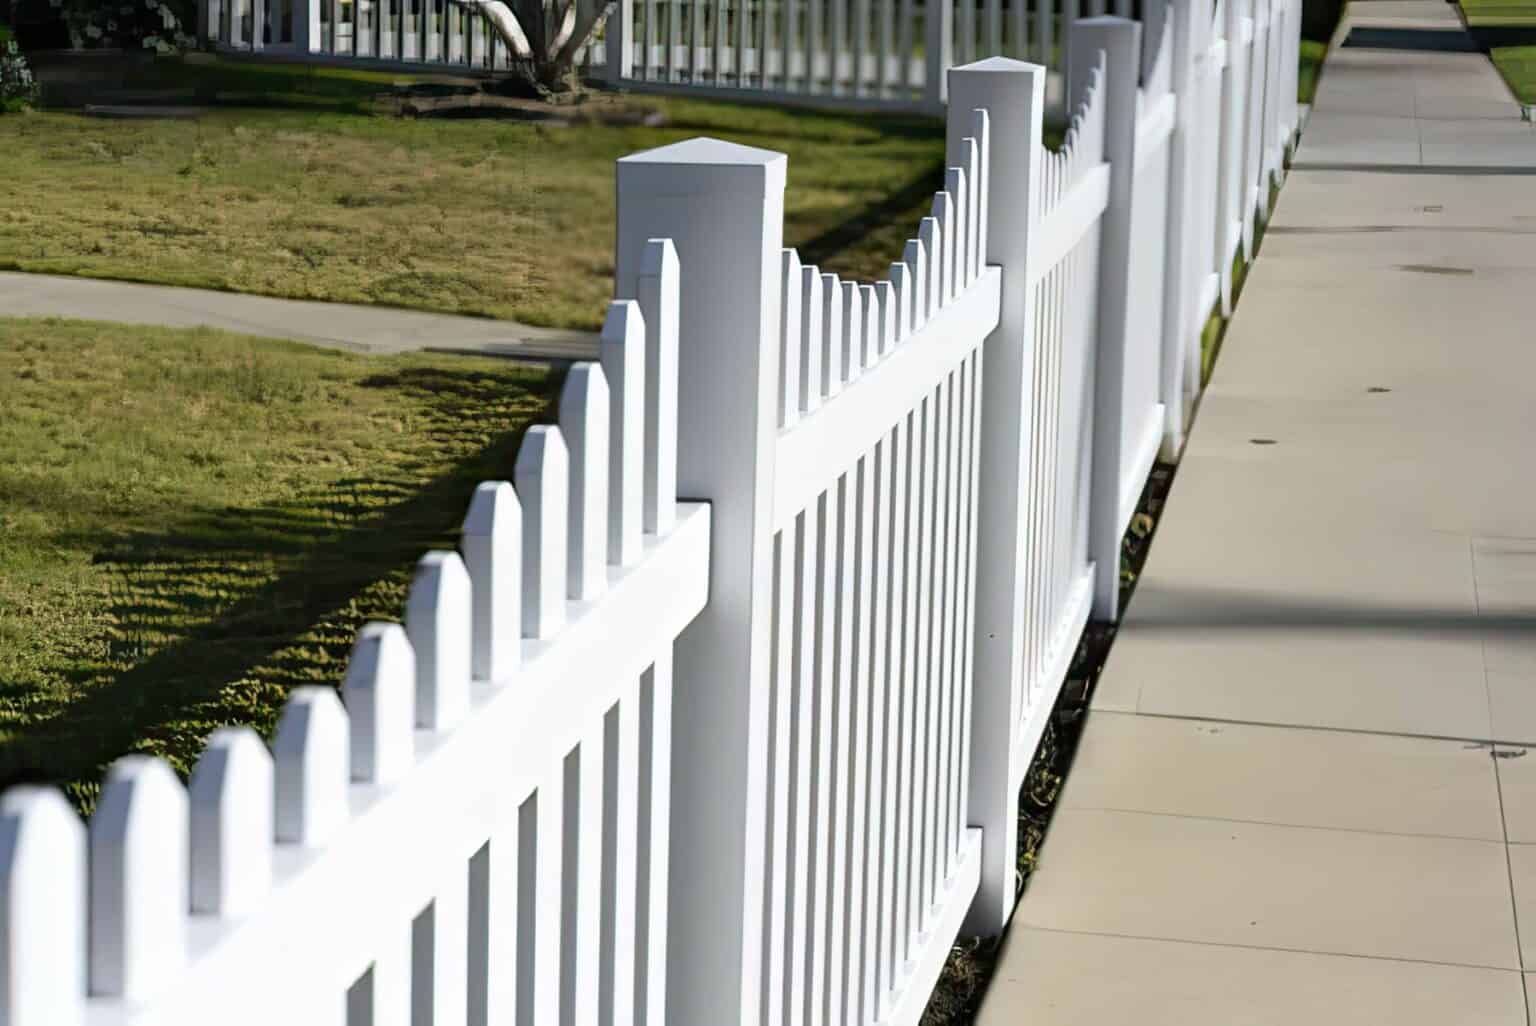 Vinyl dog ear picket fence in front of grassy front lawn with concrete walkway, with a concrete sidewalk on the other side.